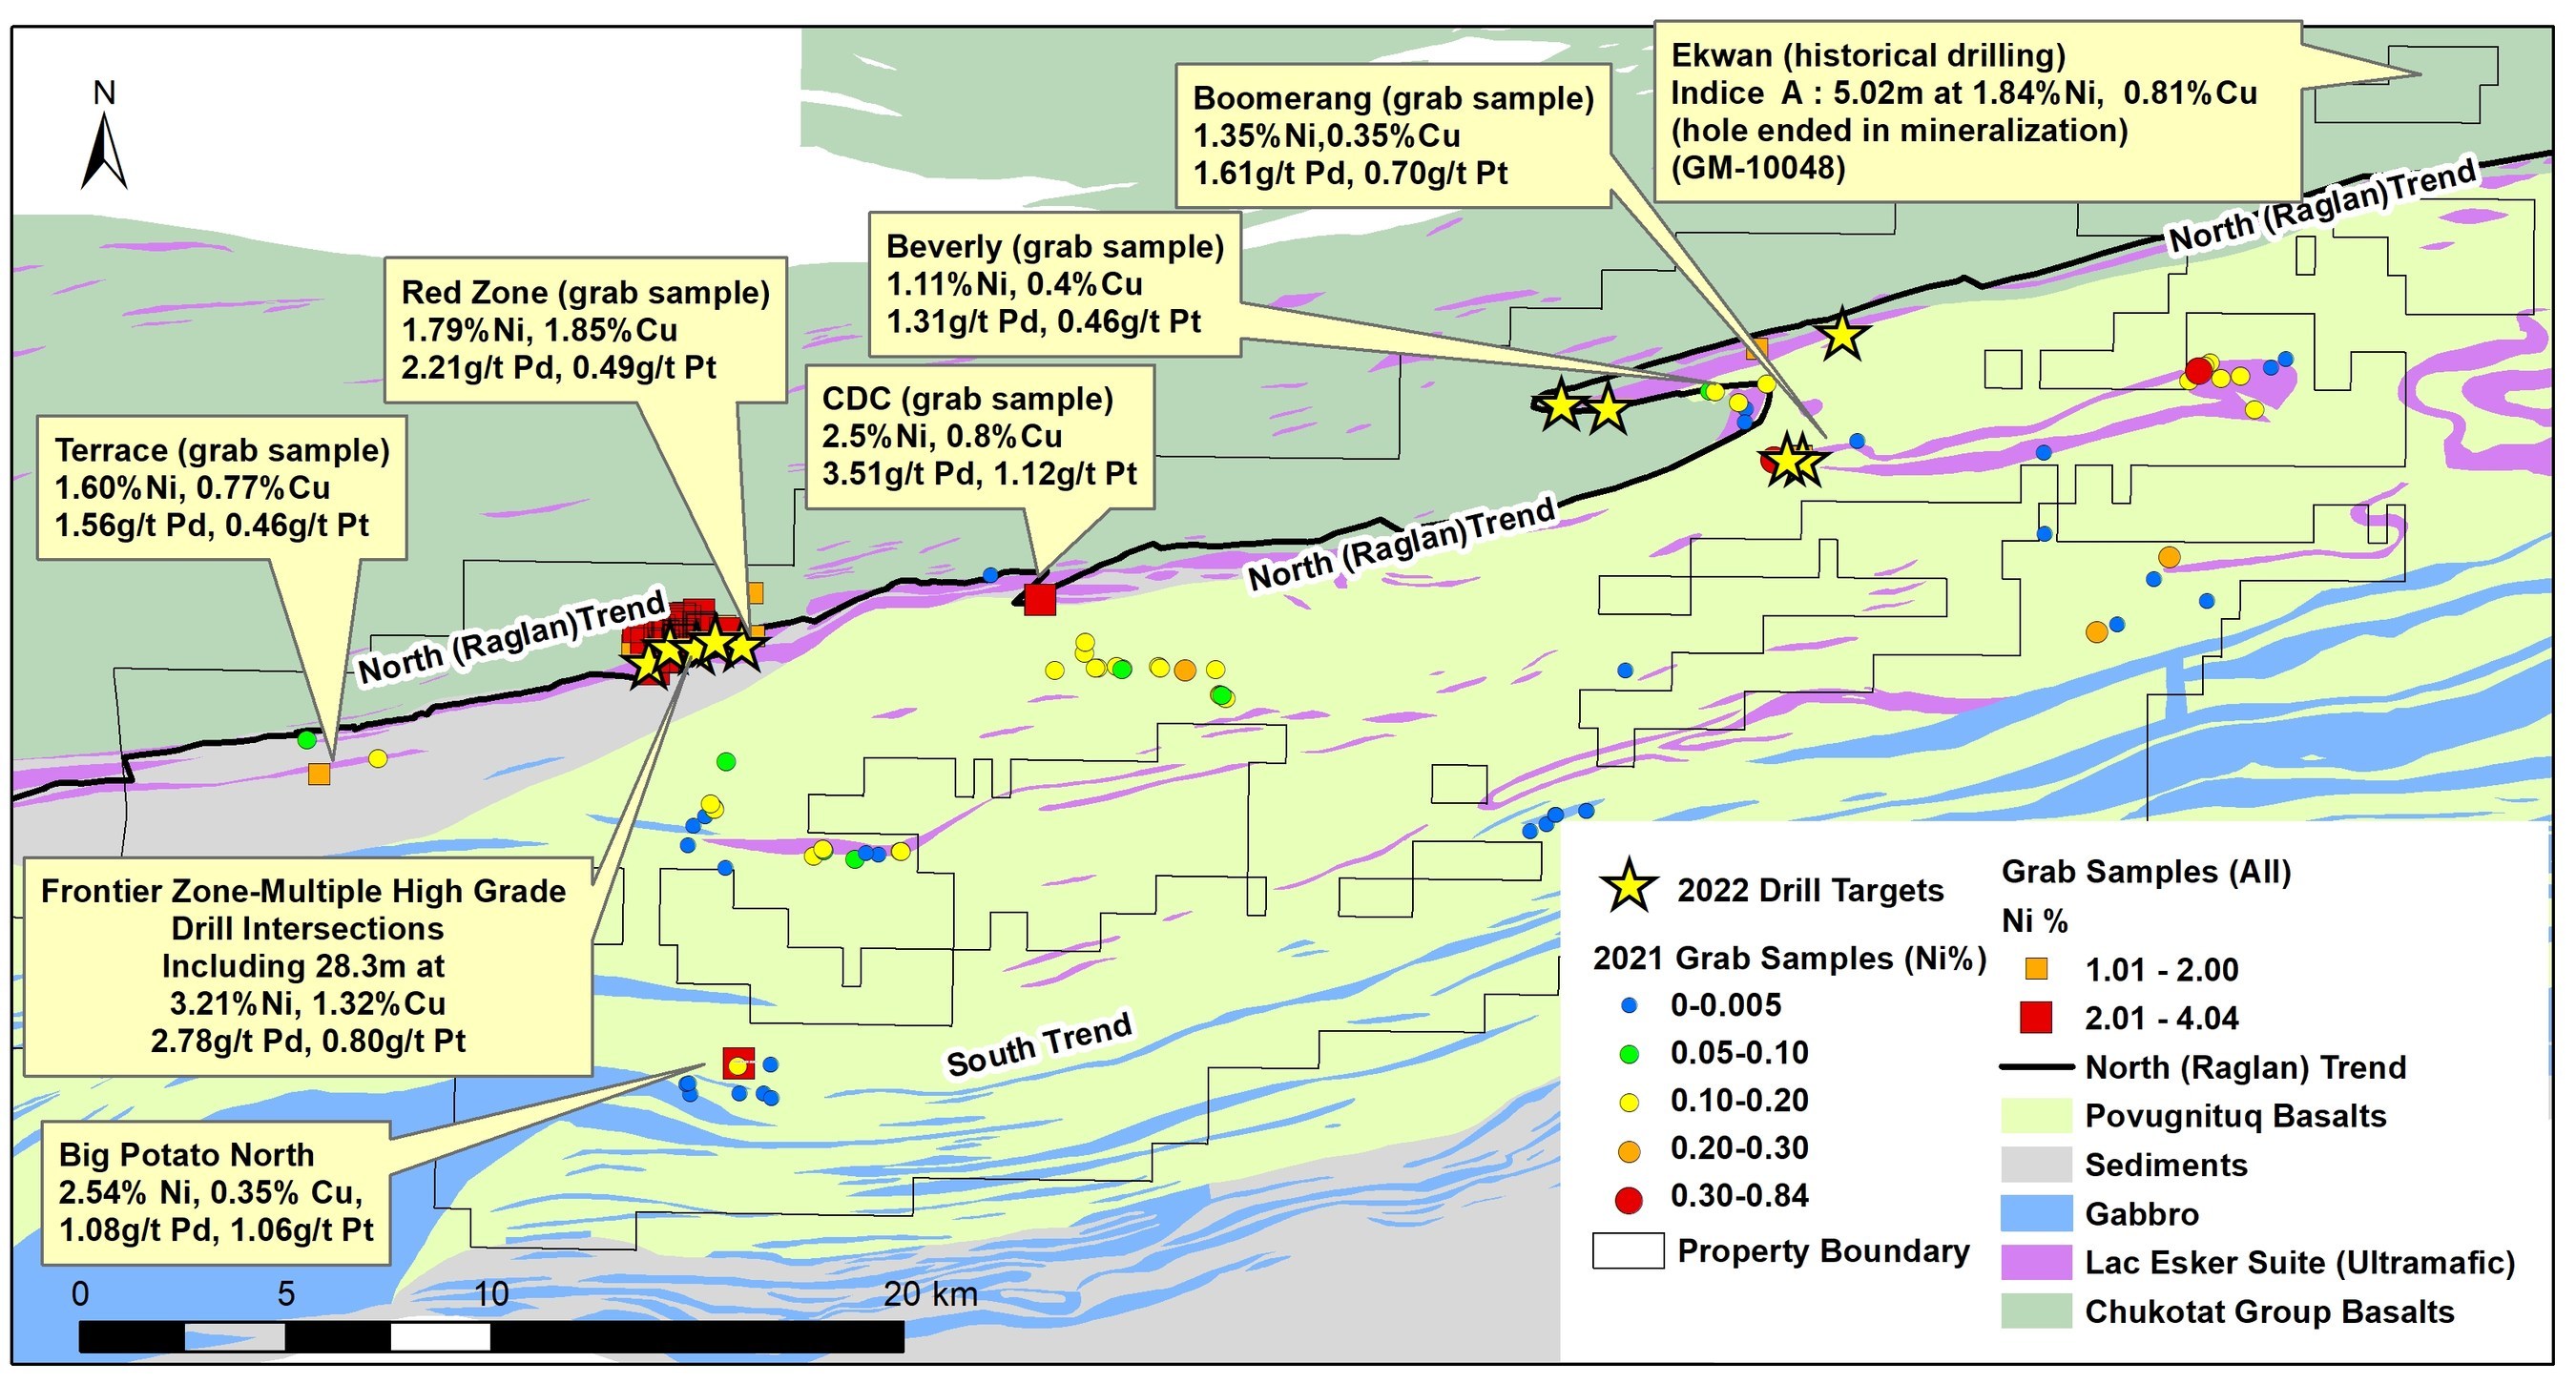 Figure 2: Map of the West Raglan Property highlighting 2022 Drill Hole Targets 
Note: grab samples are selective by nature and values reported may not be representative of mineralized zones. All drilling intervals are down-hole lengths. True thicknesses cannot be estimated with available information. The technical information presented for the Ekwan part of the West Raglan property was obtained from historical work reports filed with the Quebec Ministry of Energy and Natural Reso (CNW Group/Orford Mining Corporation)